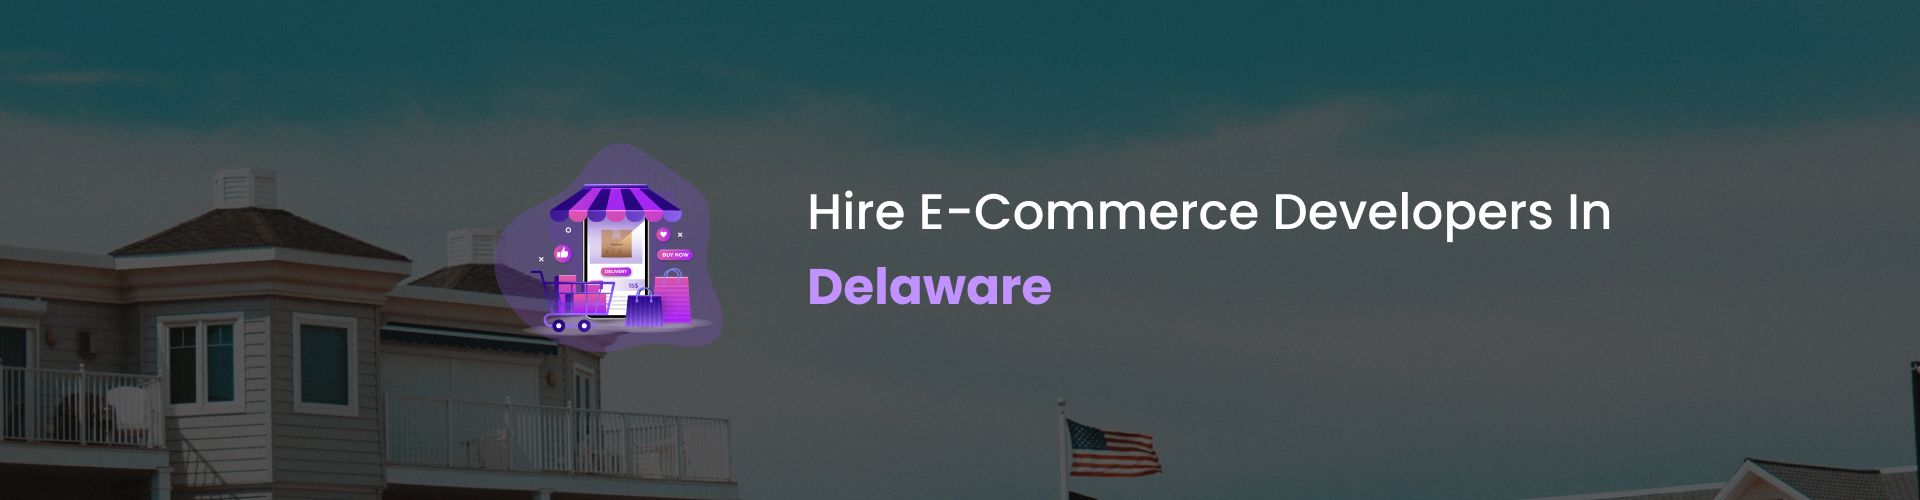 hire ecommerce developers in delaware